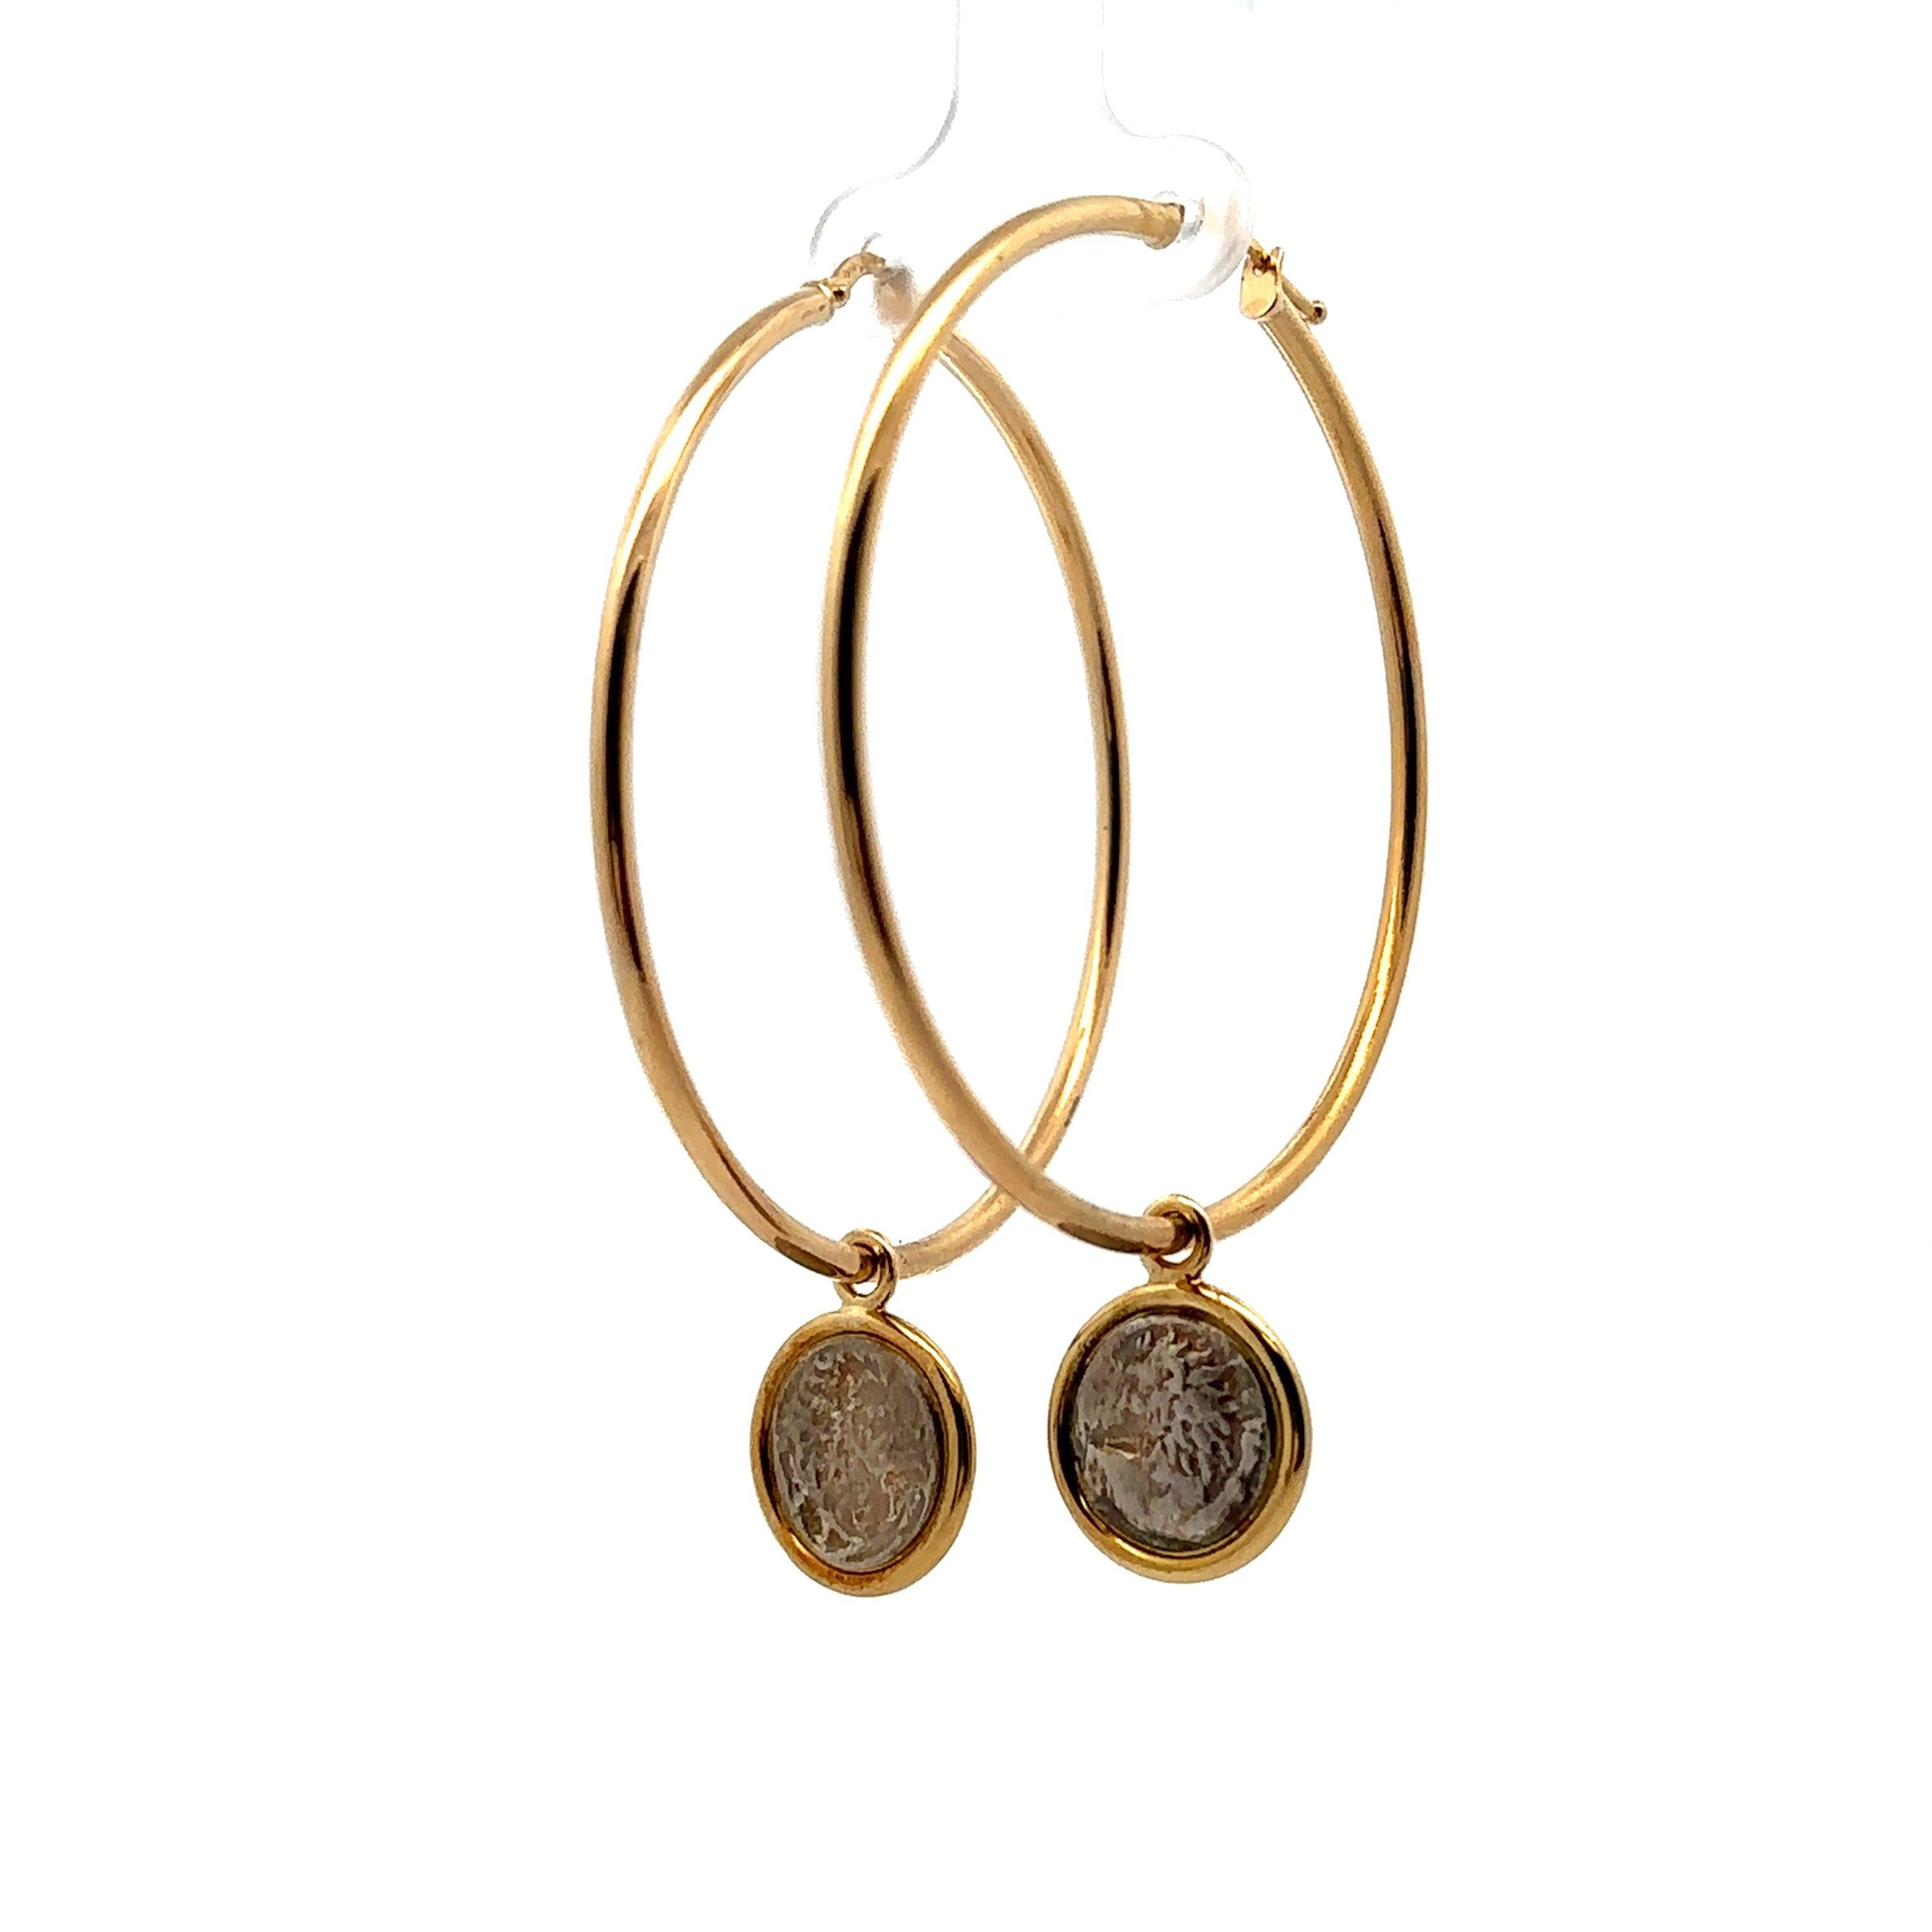 Women's Dubini 18KT Yellow Gold Large Hoop Earrings with Silver Lion Coins